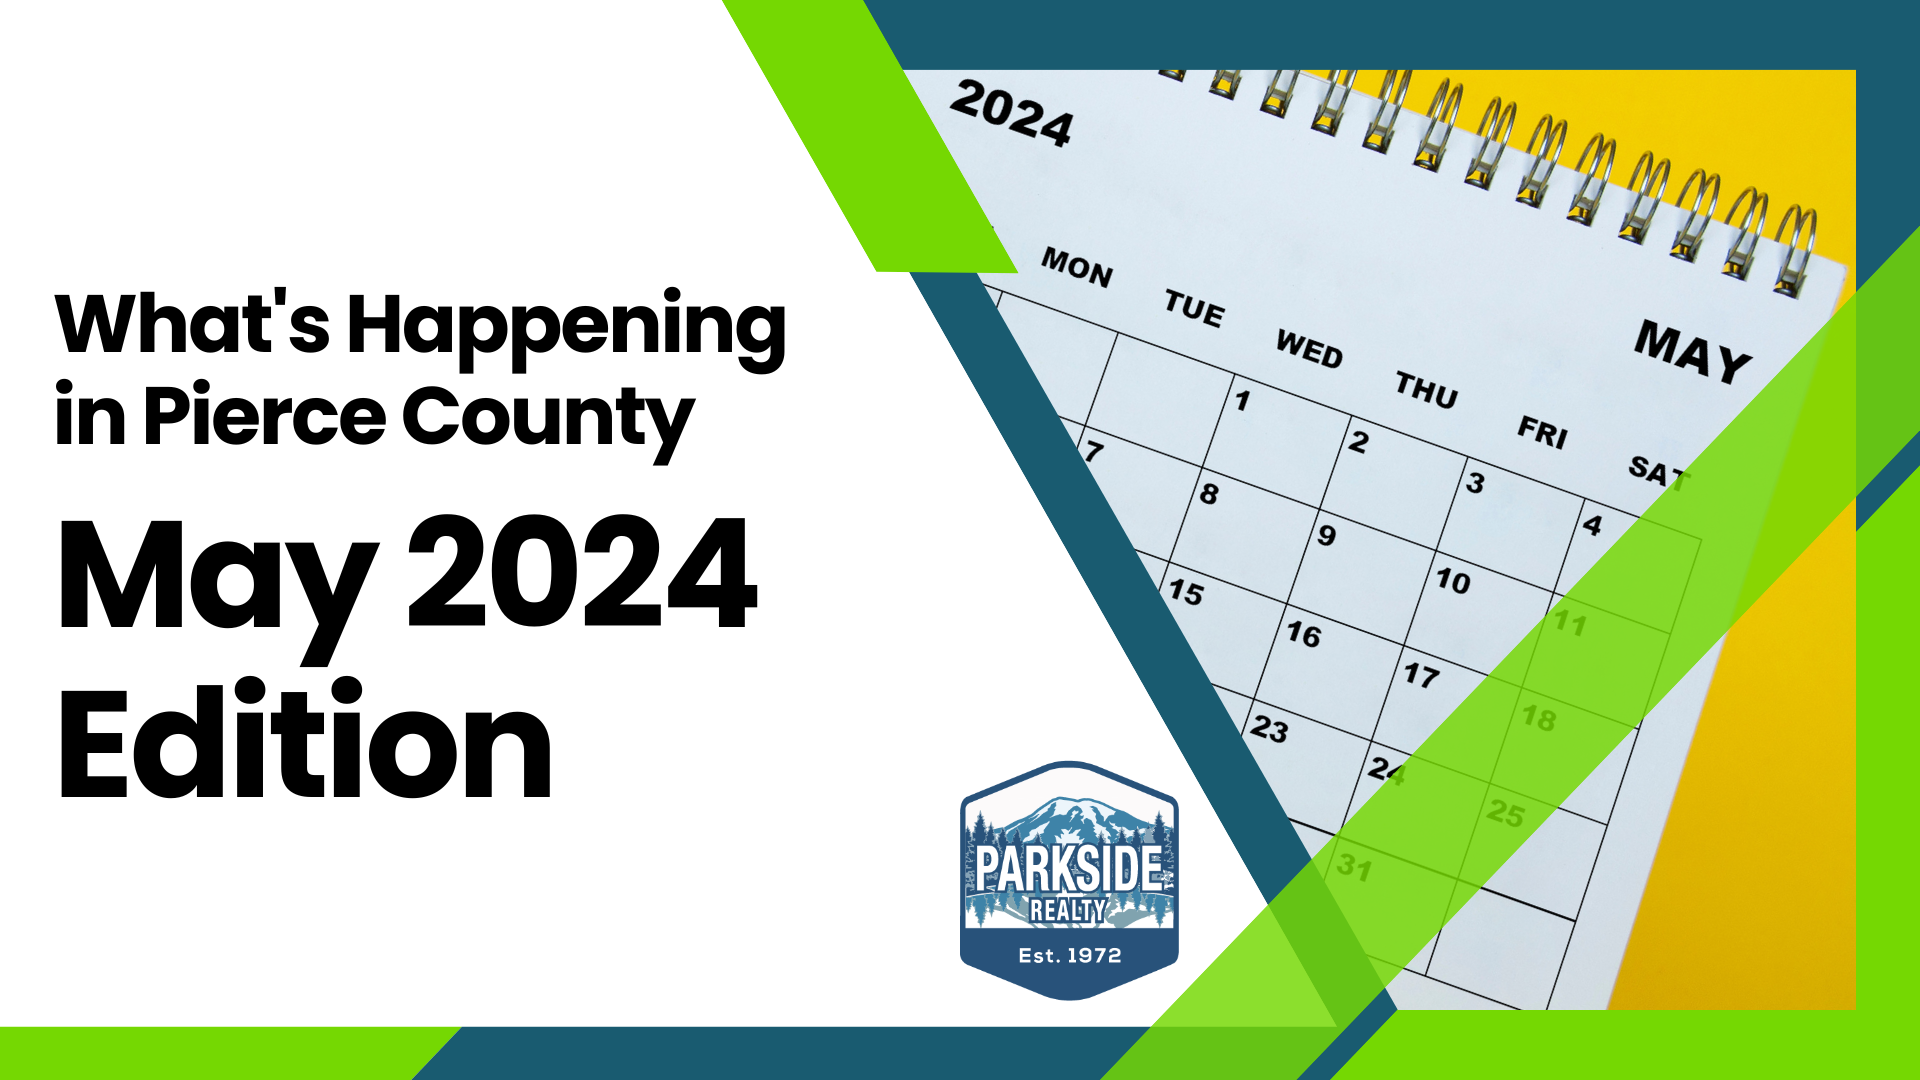 What’s Happening in Pierce County: May 2024 Edition